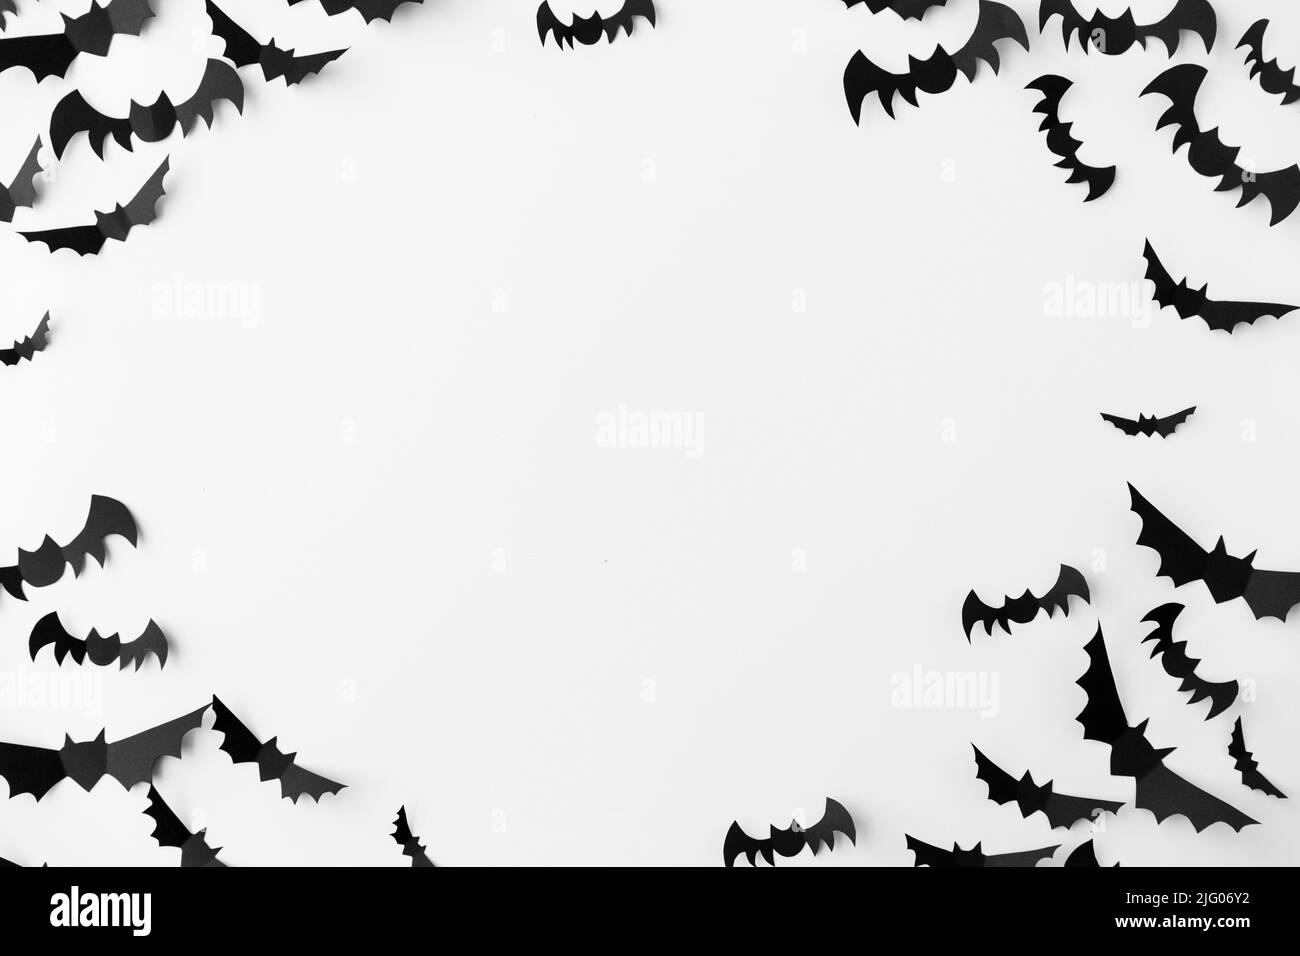 Gothic Damask Grunge Halloween Papers 